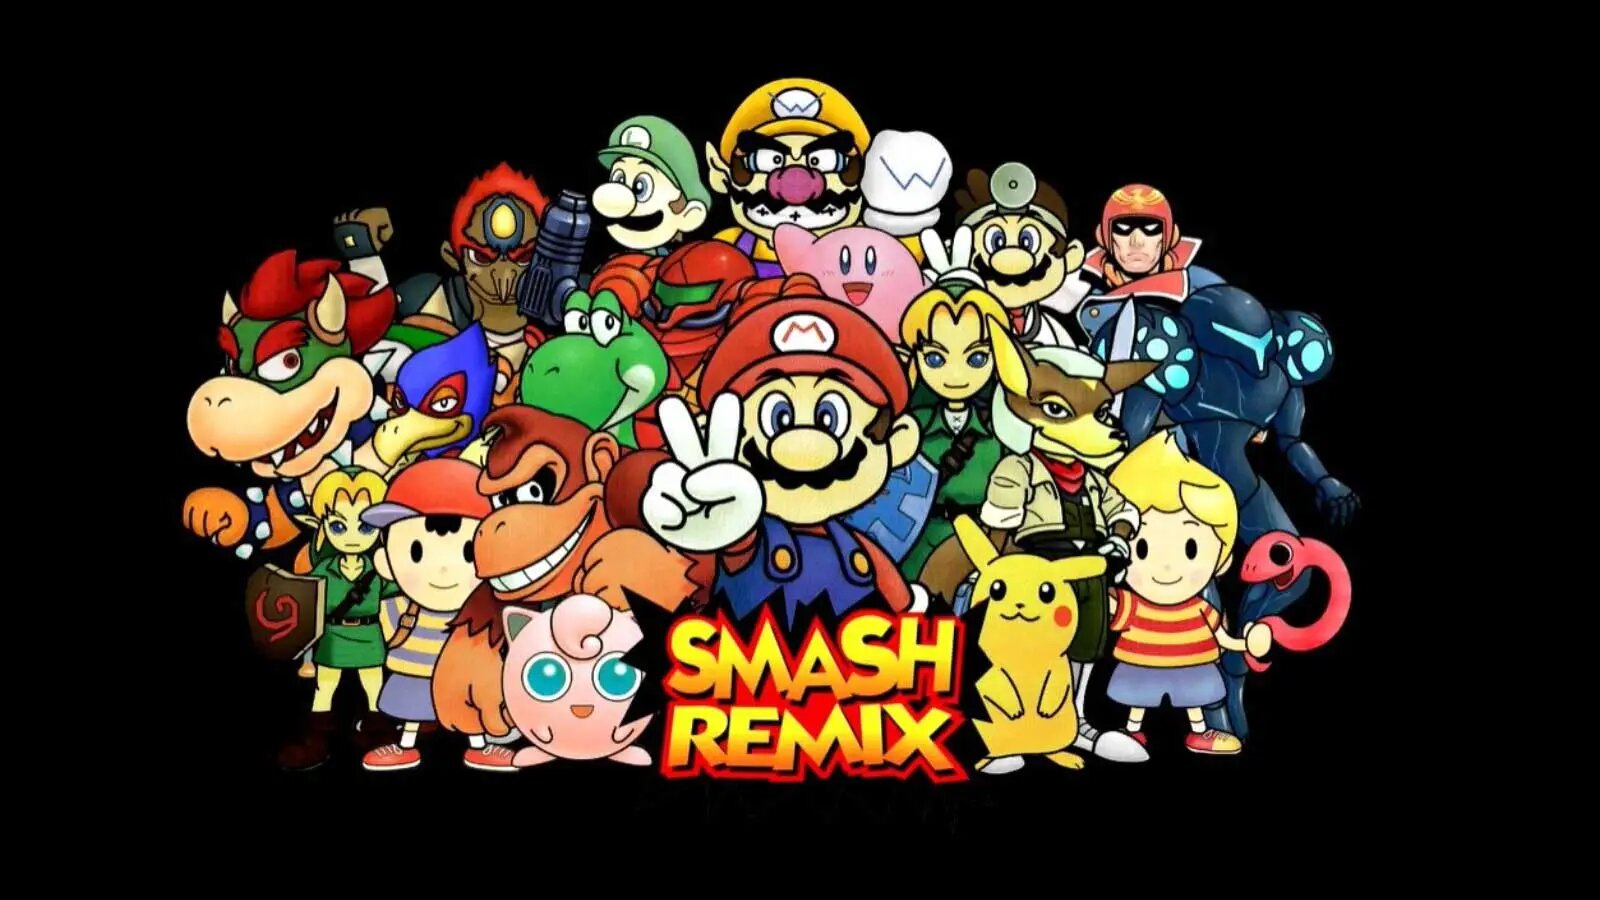 Smash Remix: Version 1.4.0 Release - EXPANSION PAK REQUIRED 